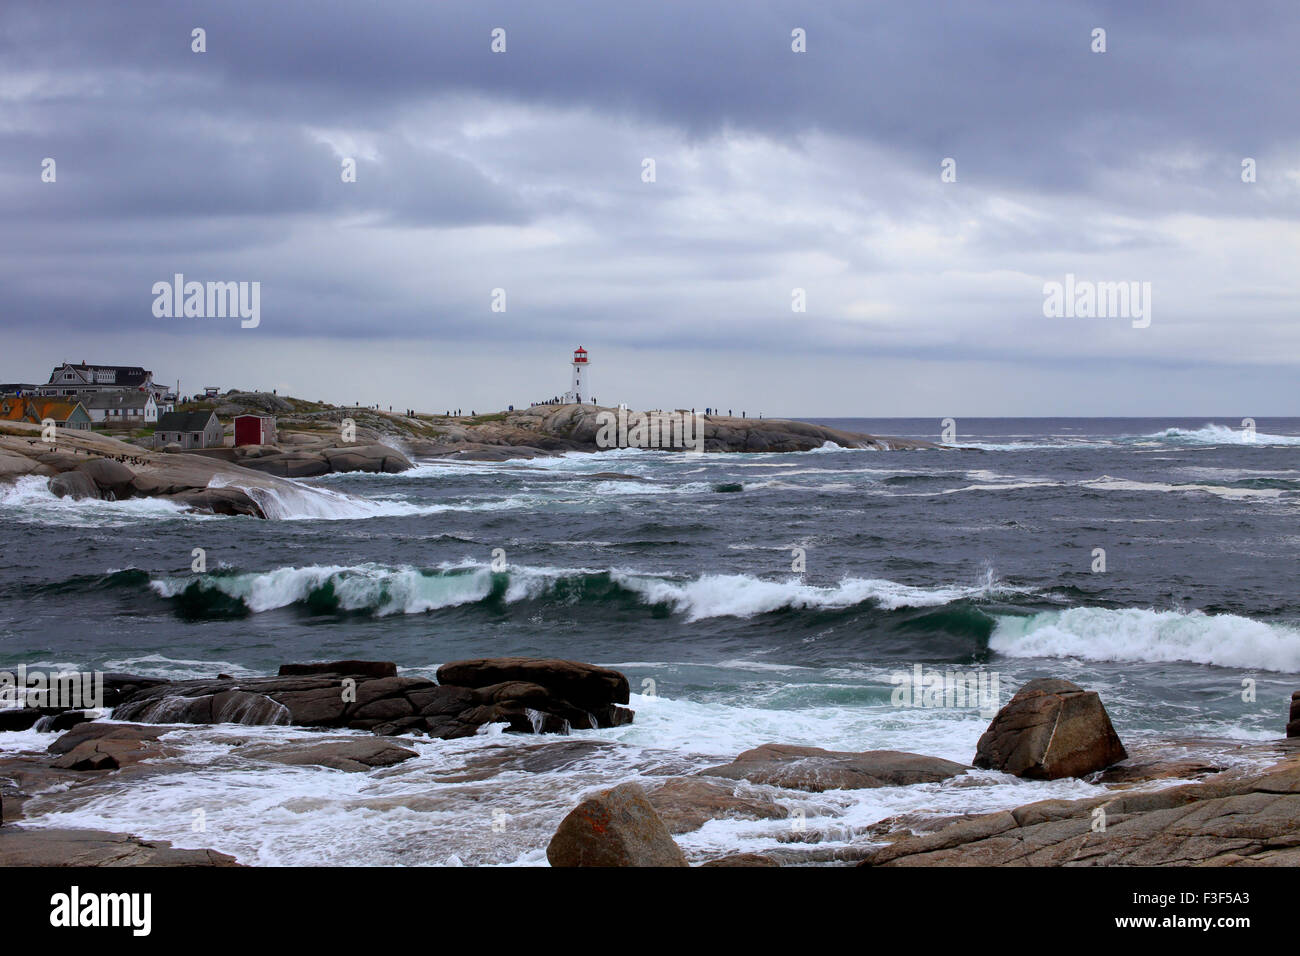 The Peggy's Cove landscape and seascape in Nova Scotia, Canada during a storm with stormy seas from a hurricane Stock Photo